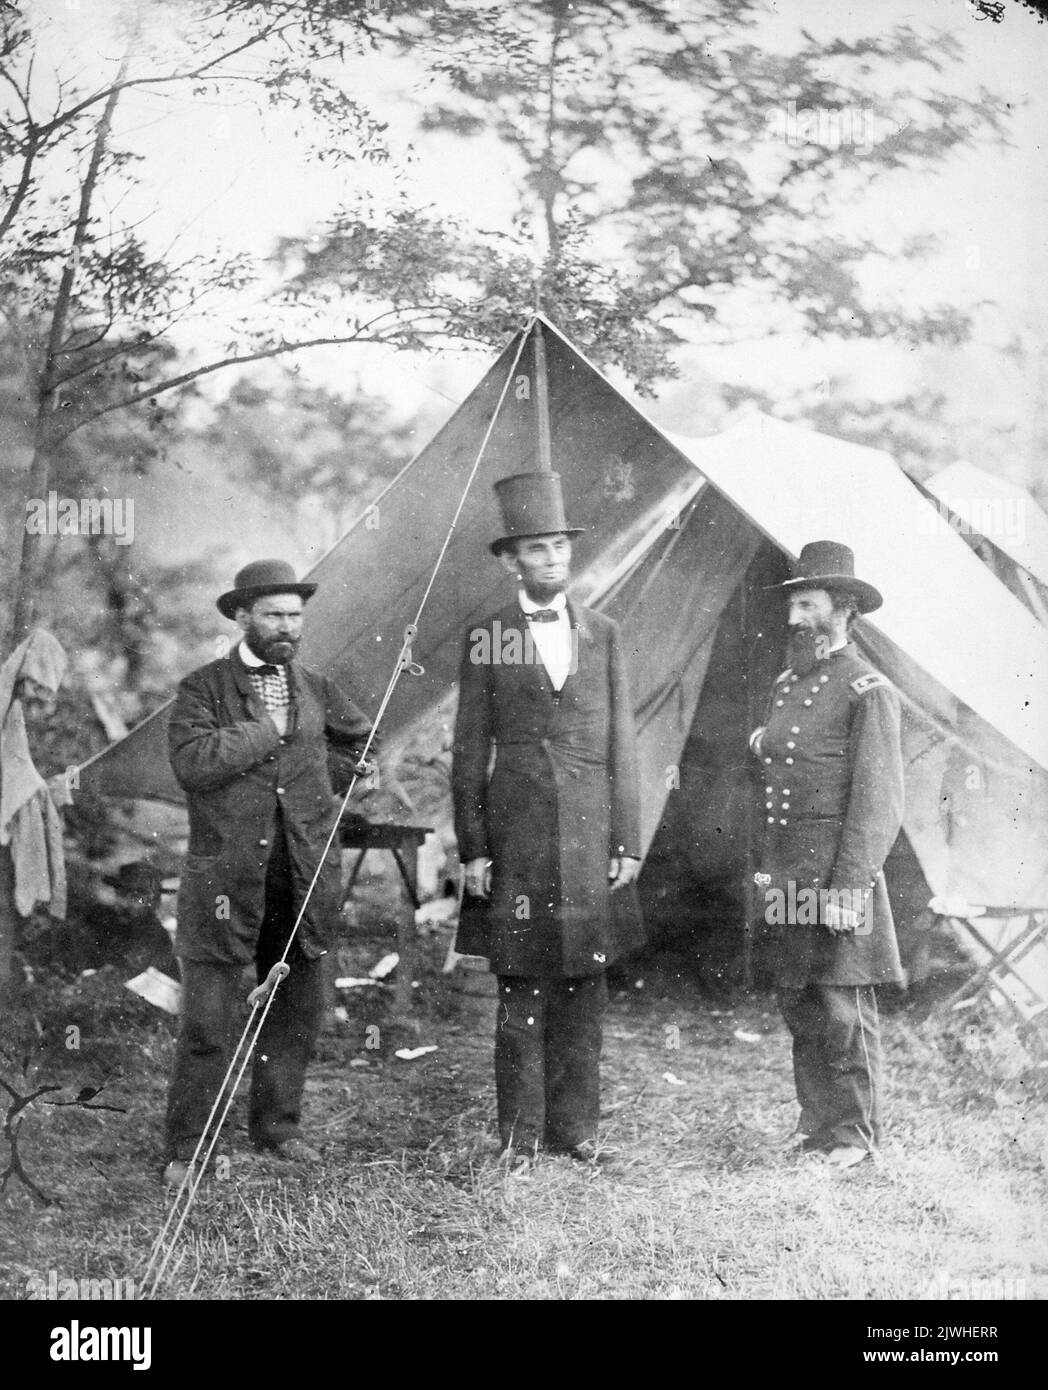 President Lincoln, Allan Pinkerton, and Major General John A. McClernand together during the American Civil War Stock Photo